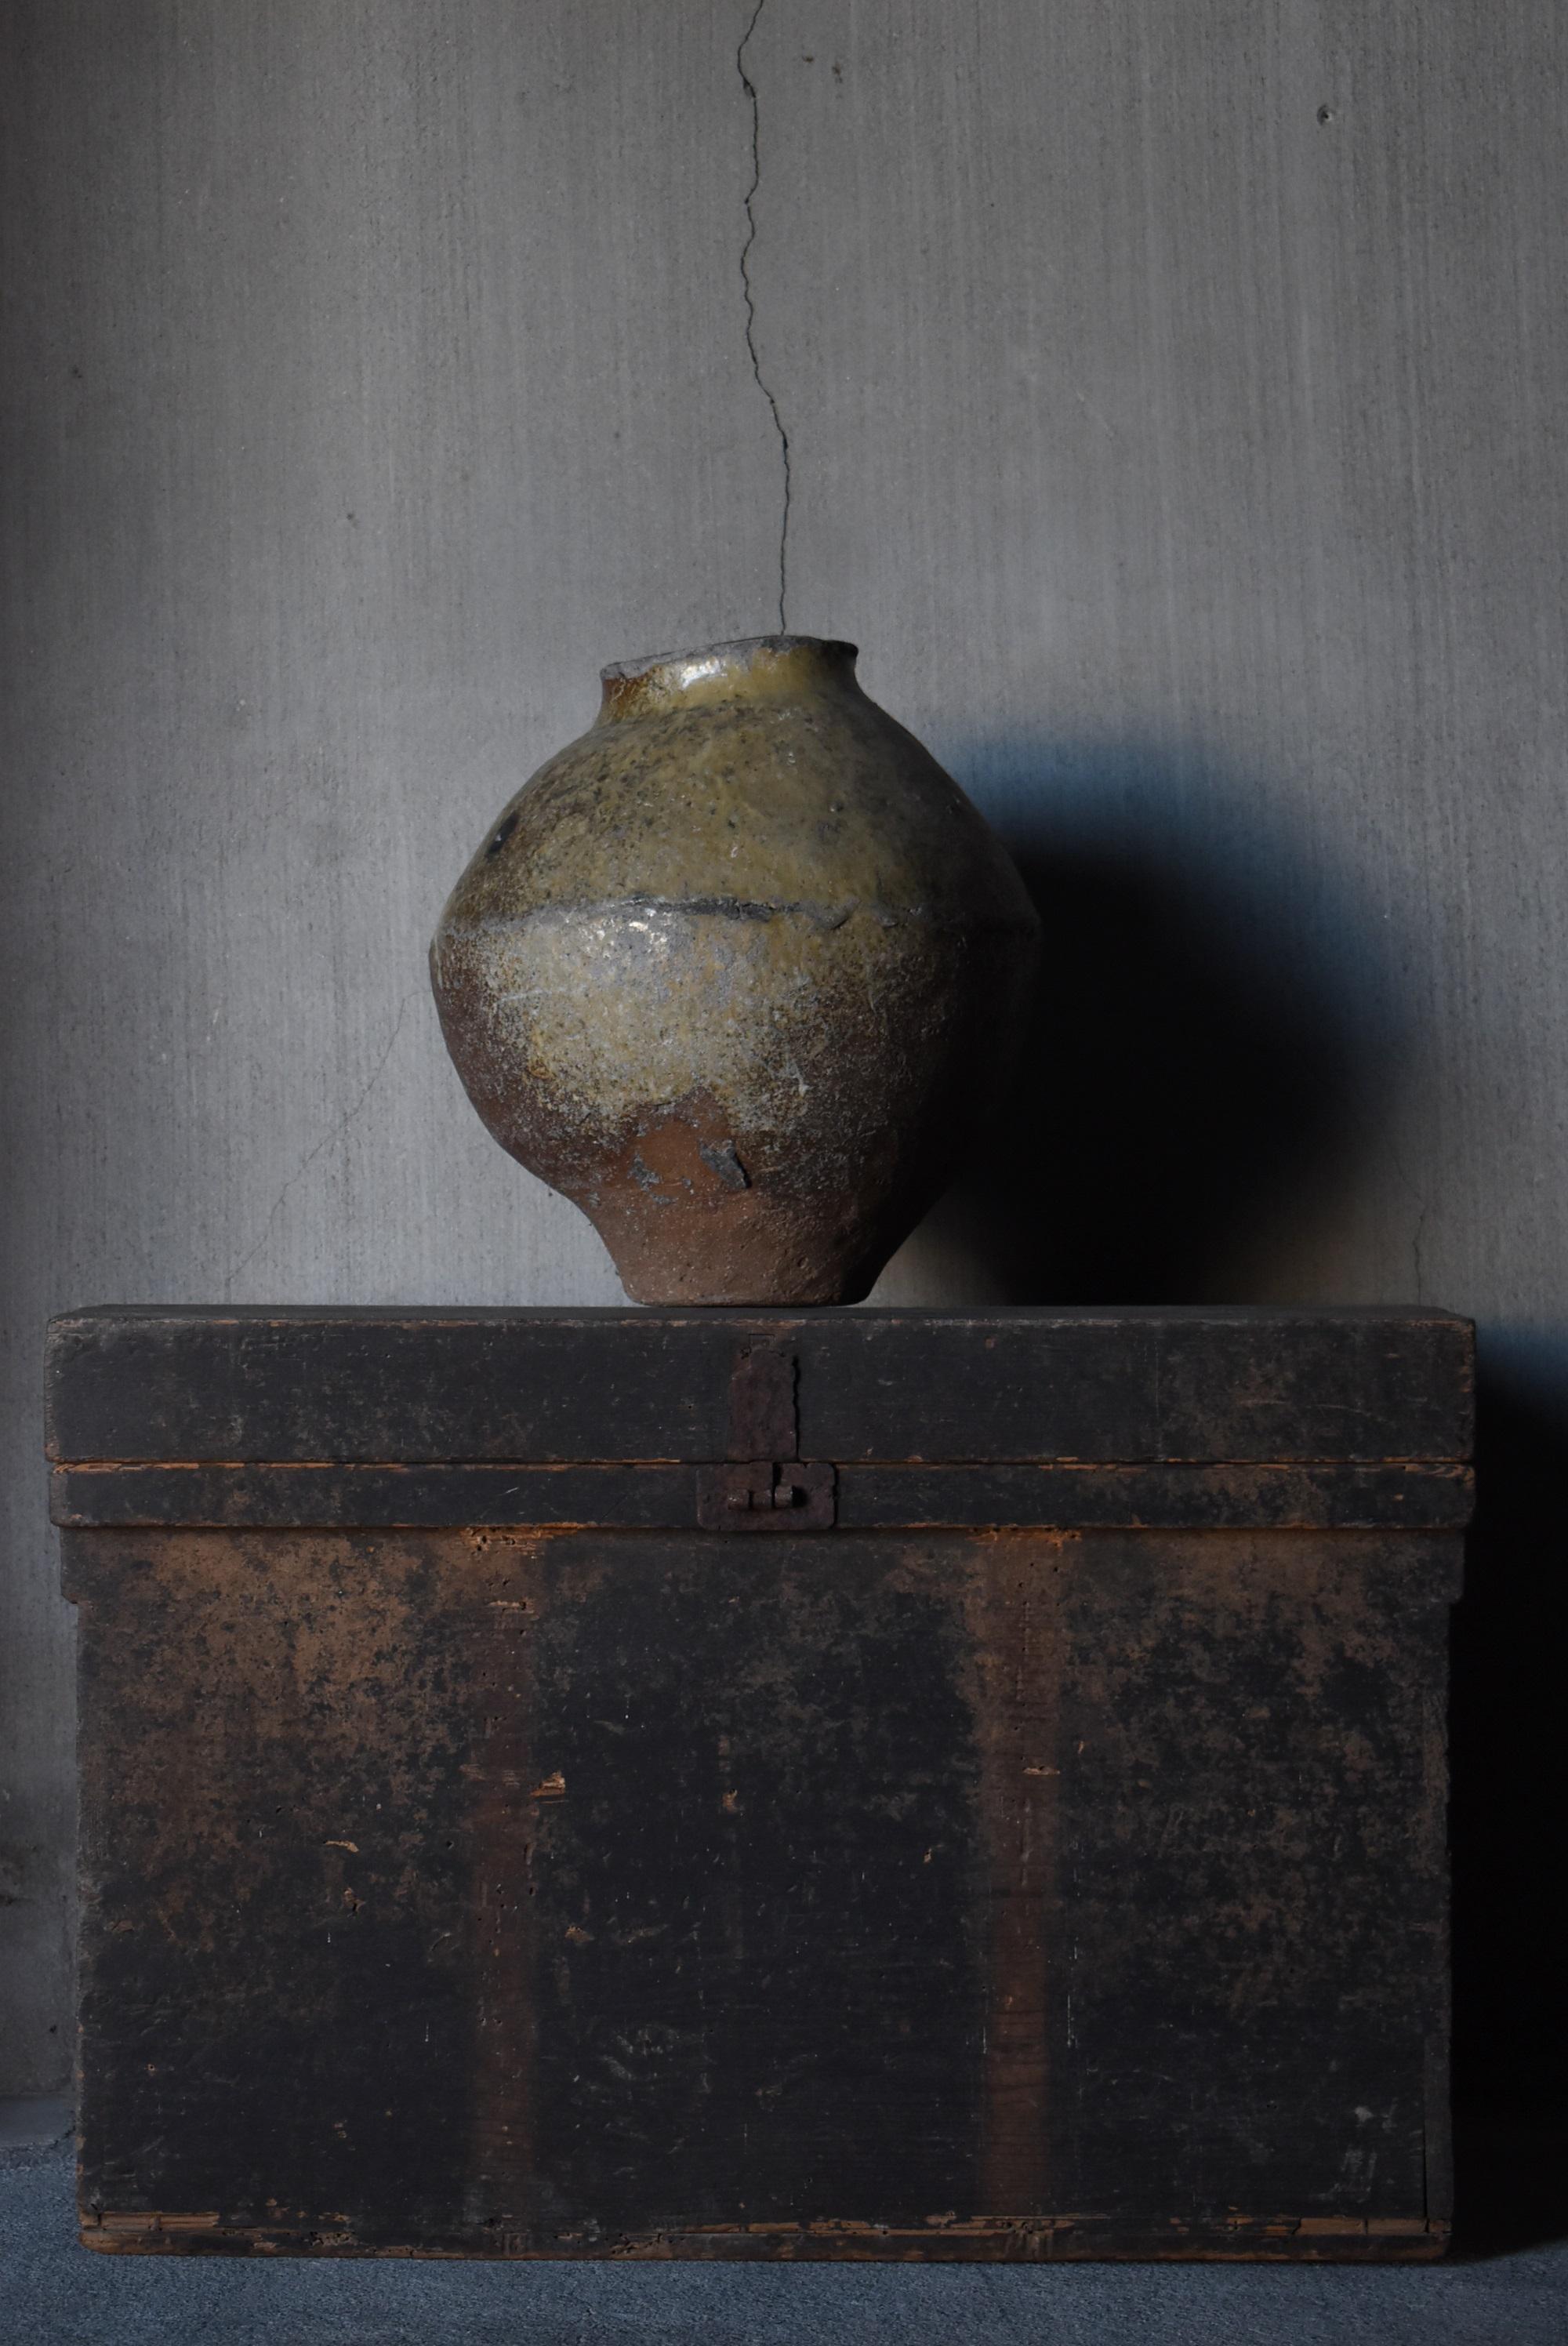 It is a jar from the Edo period (1700s-1800s) in Japan.
It is called 